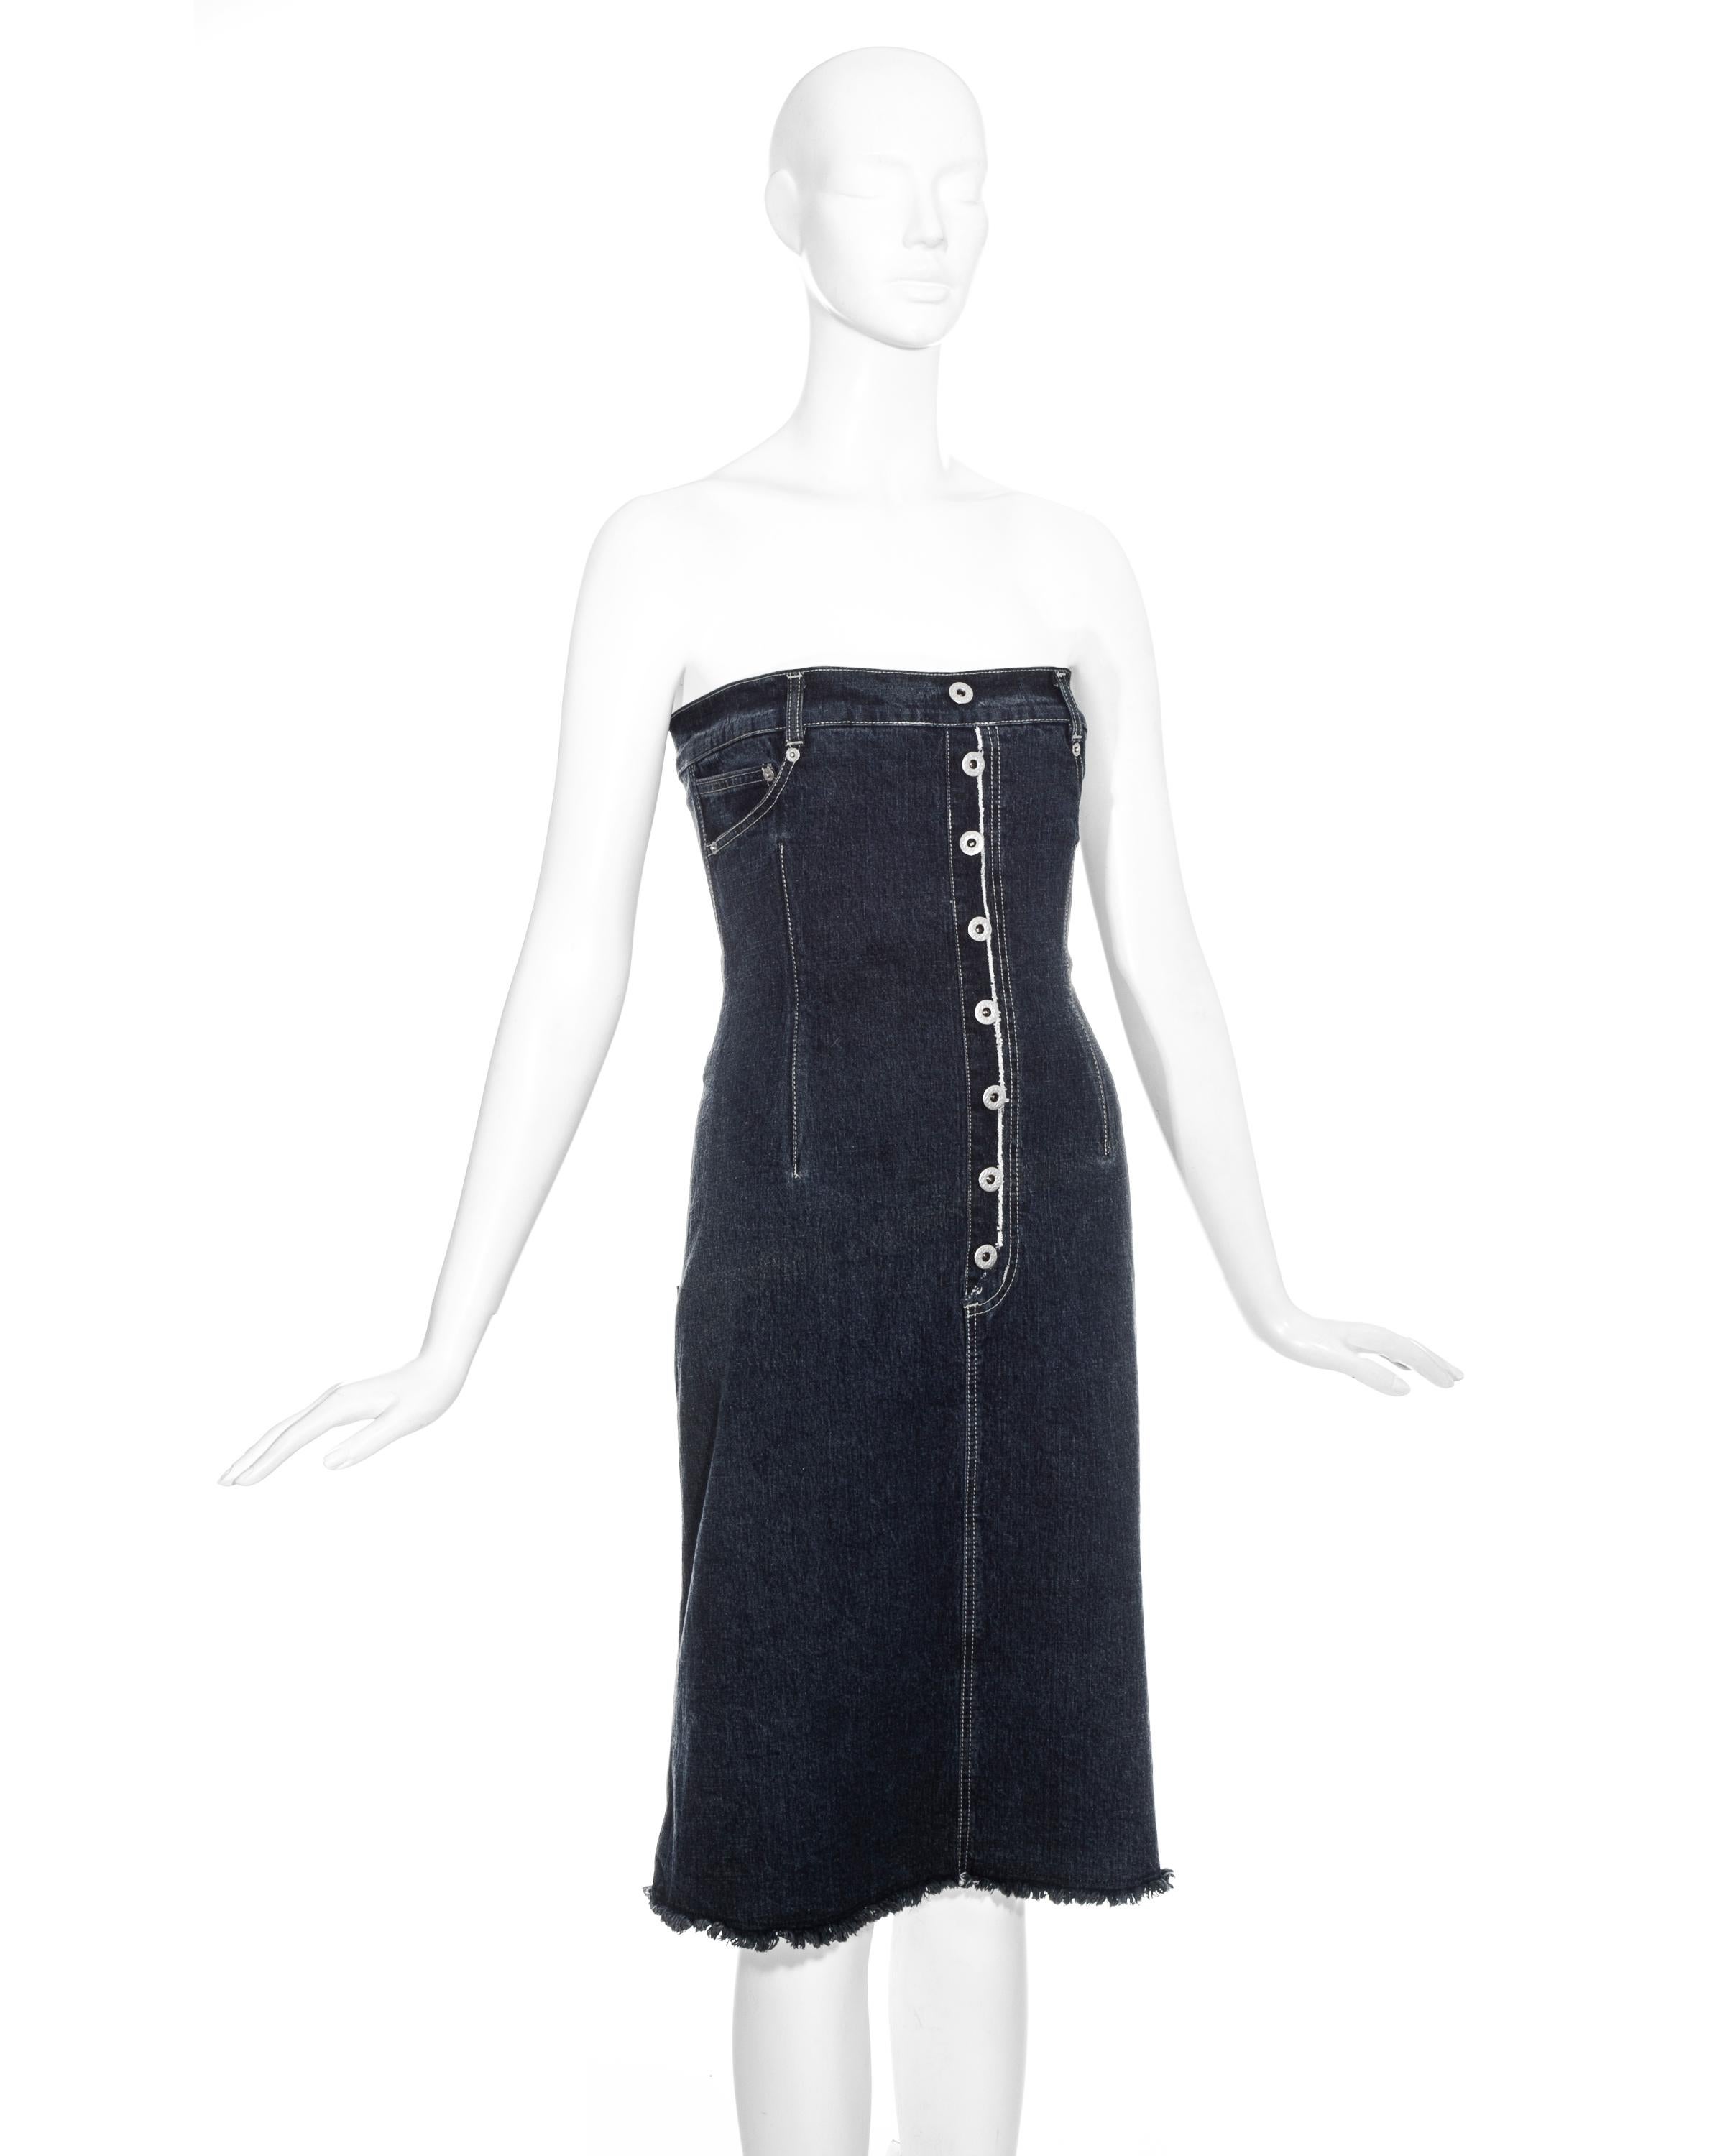 Vintage Alexander McQueen denim corset dress.
One of his earliest collections when Alexander McQueen himself was the designer and had a denim line. This piece was shown at London Fashion Week.
Corset inside.